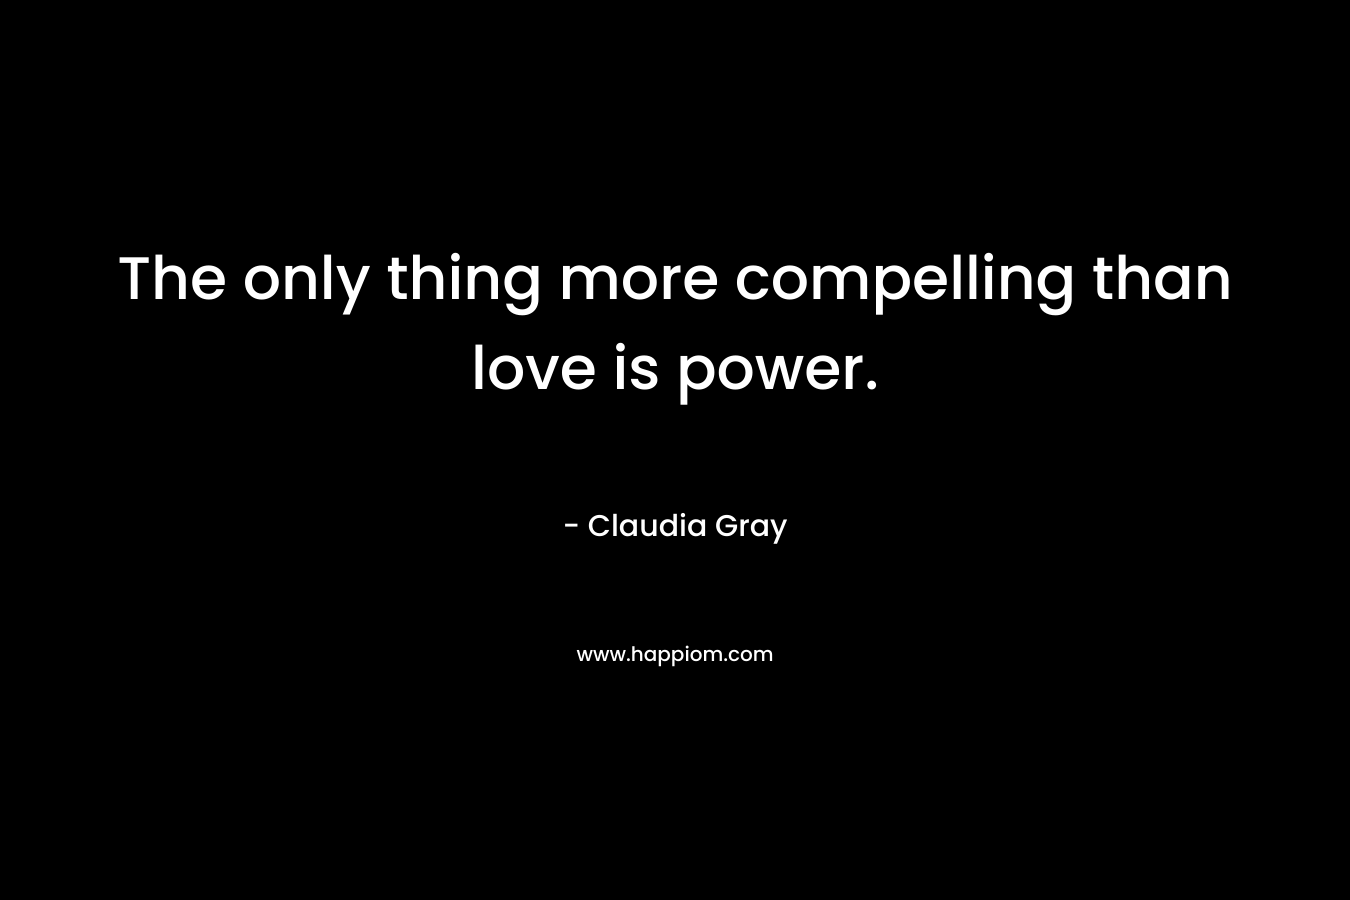 The only thing more compelling than love is power.